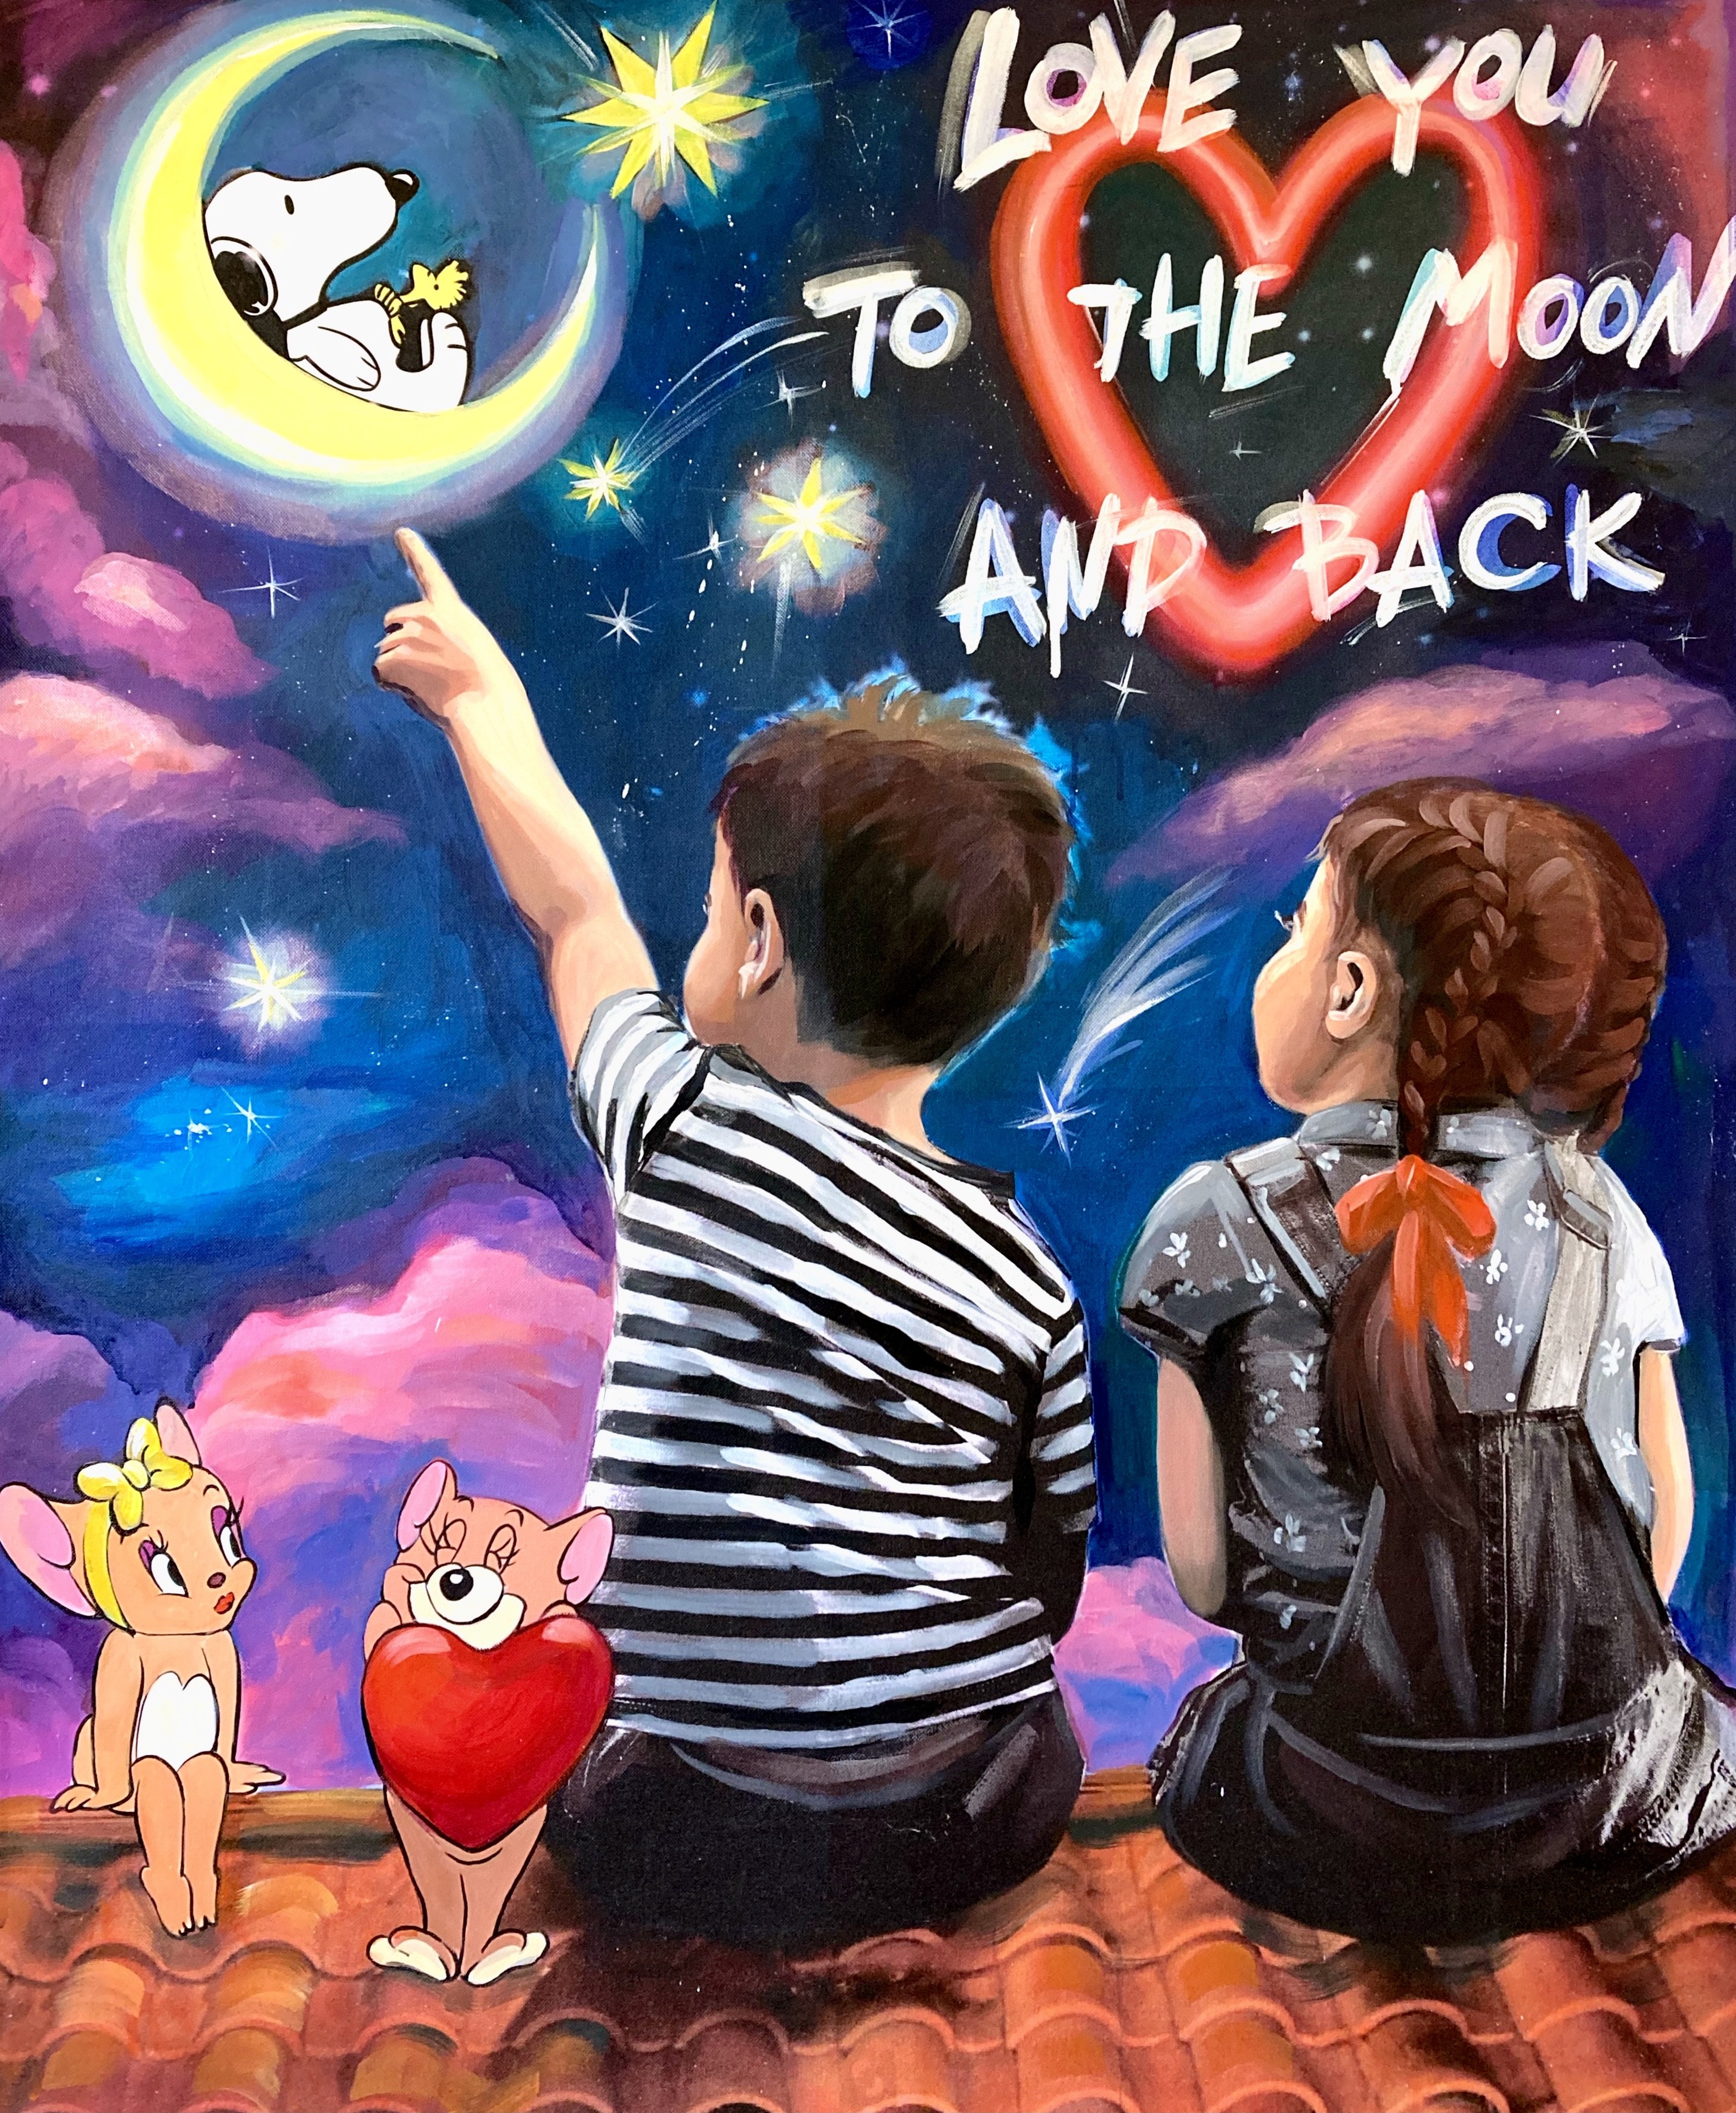 ▷ Love You To The Moon And Back par Yasna Godovanik, 2021, Peinture